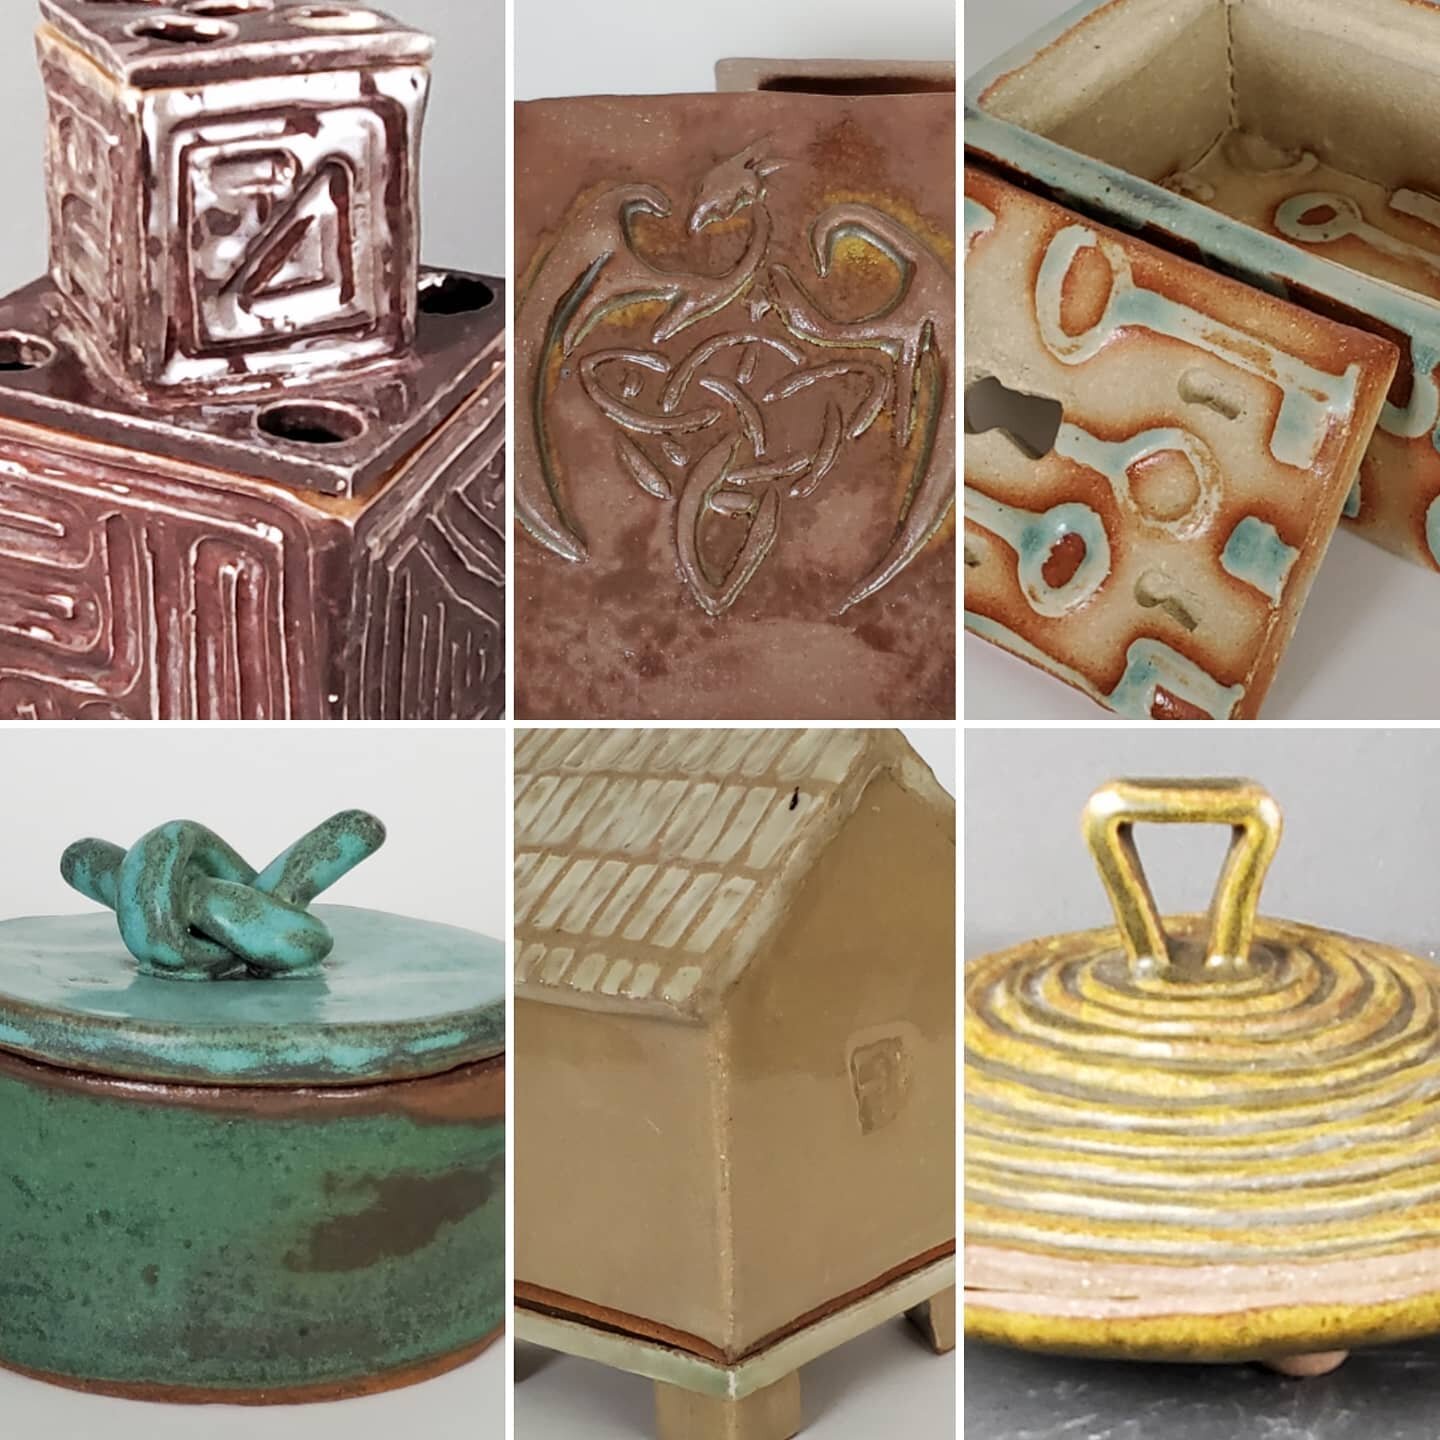 A small selection from my students' slab box project.

Today was the final day for my intro ceramics students at UGA.  I am so proud of them for working so hard and making such good work even with all the distancing and extra precautions and uncertai